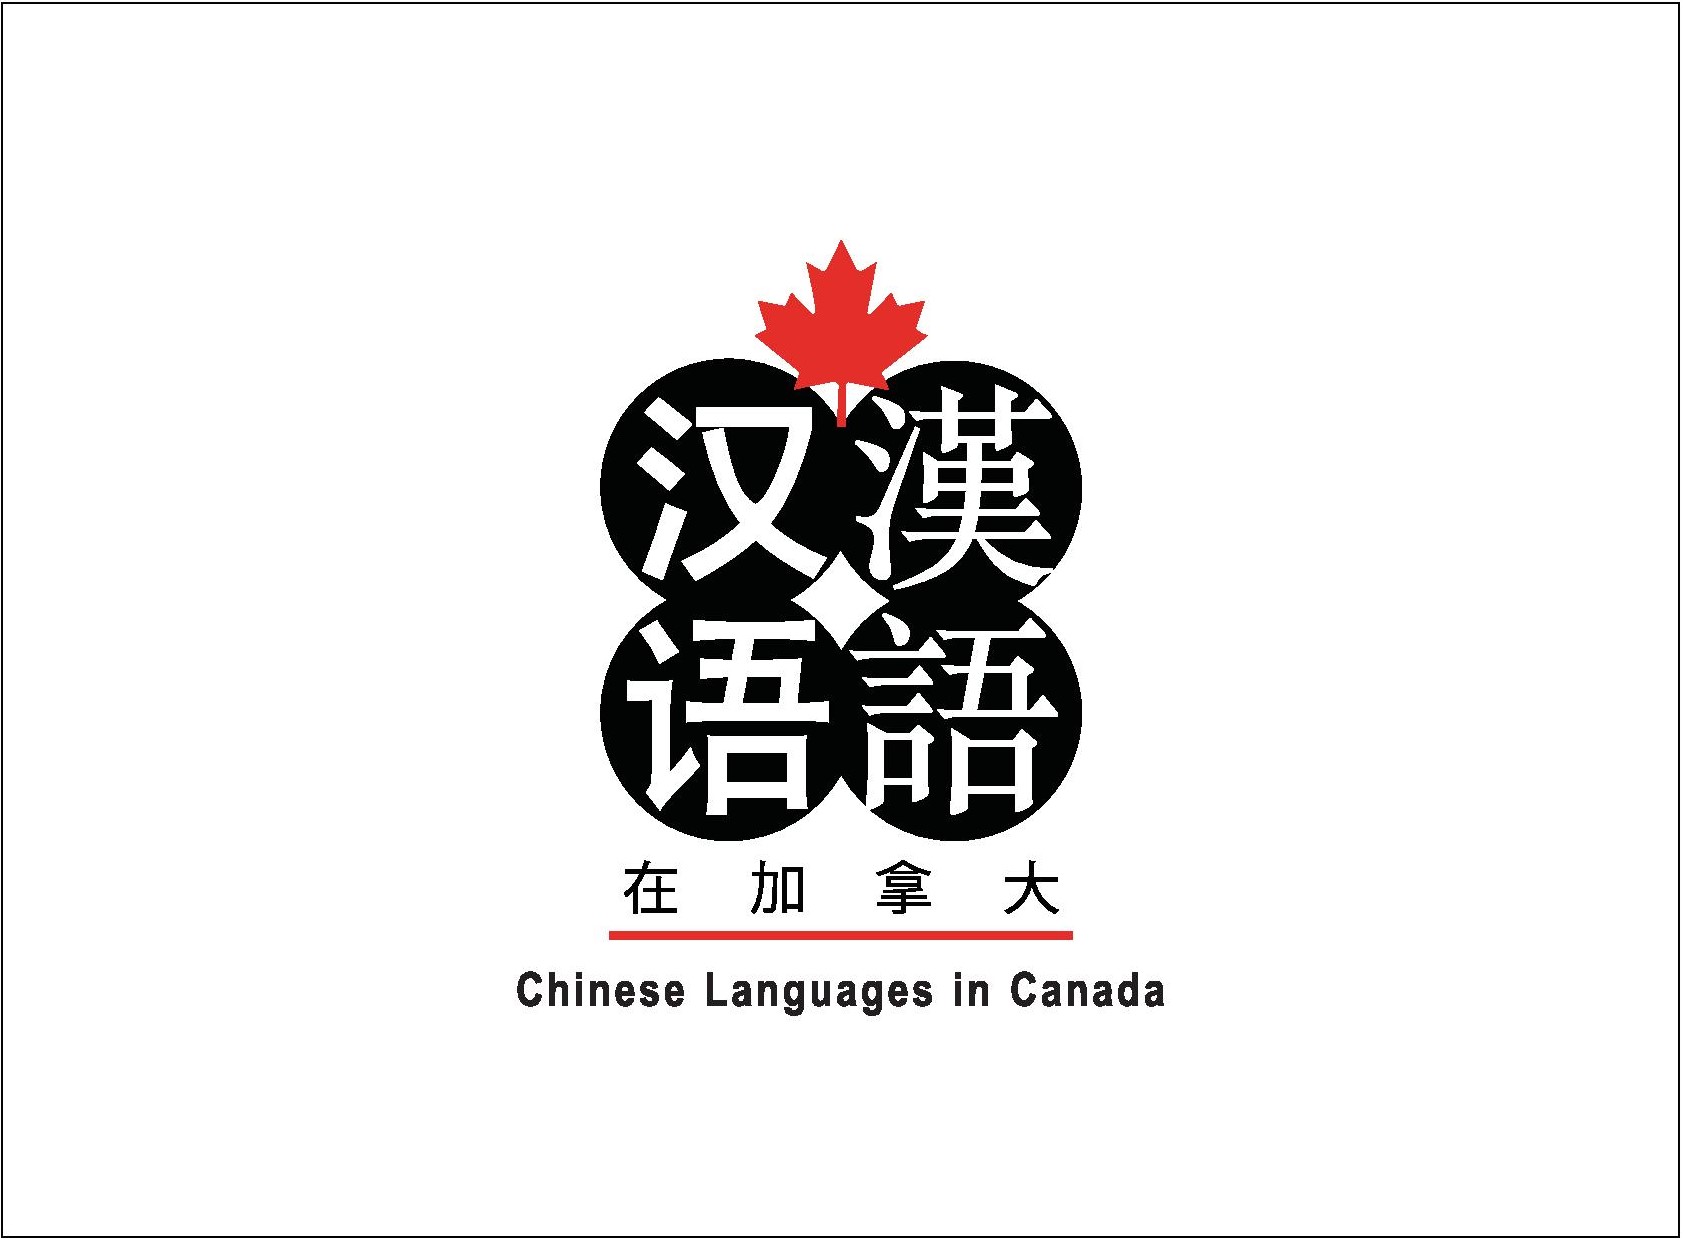 Chinese Languages in Canada